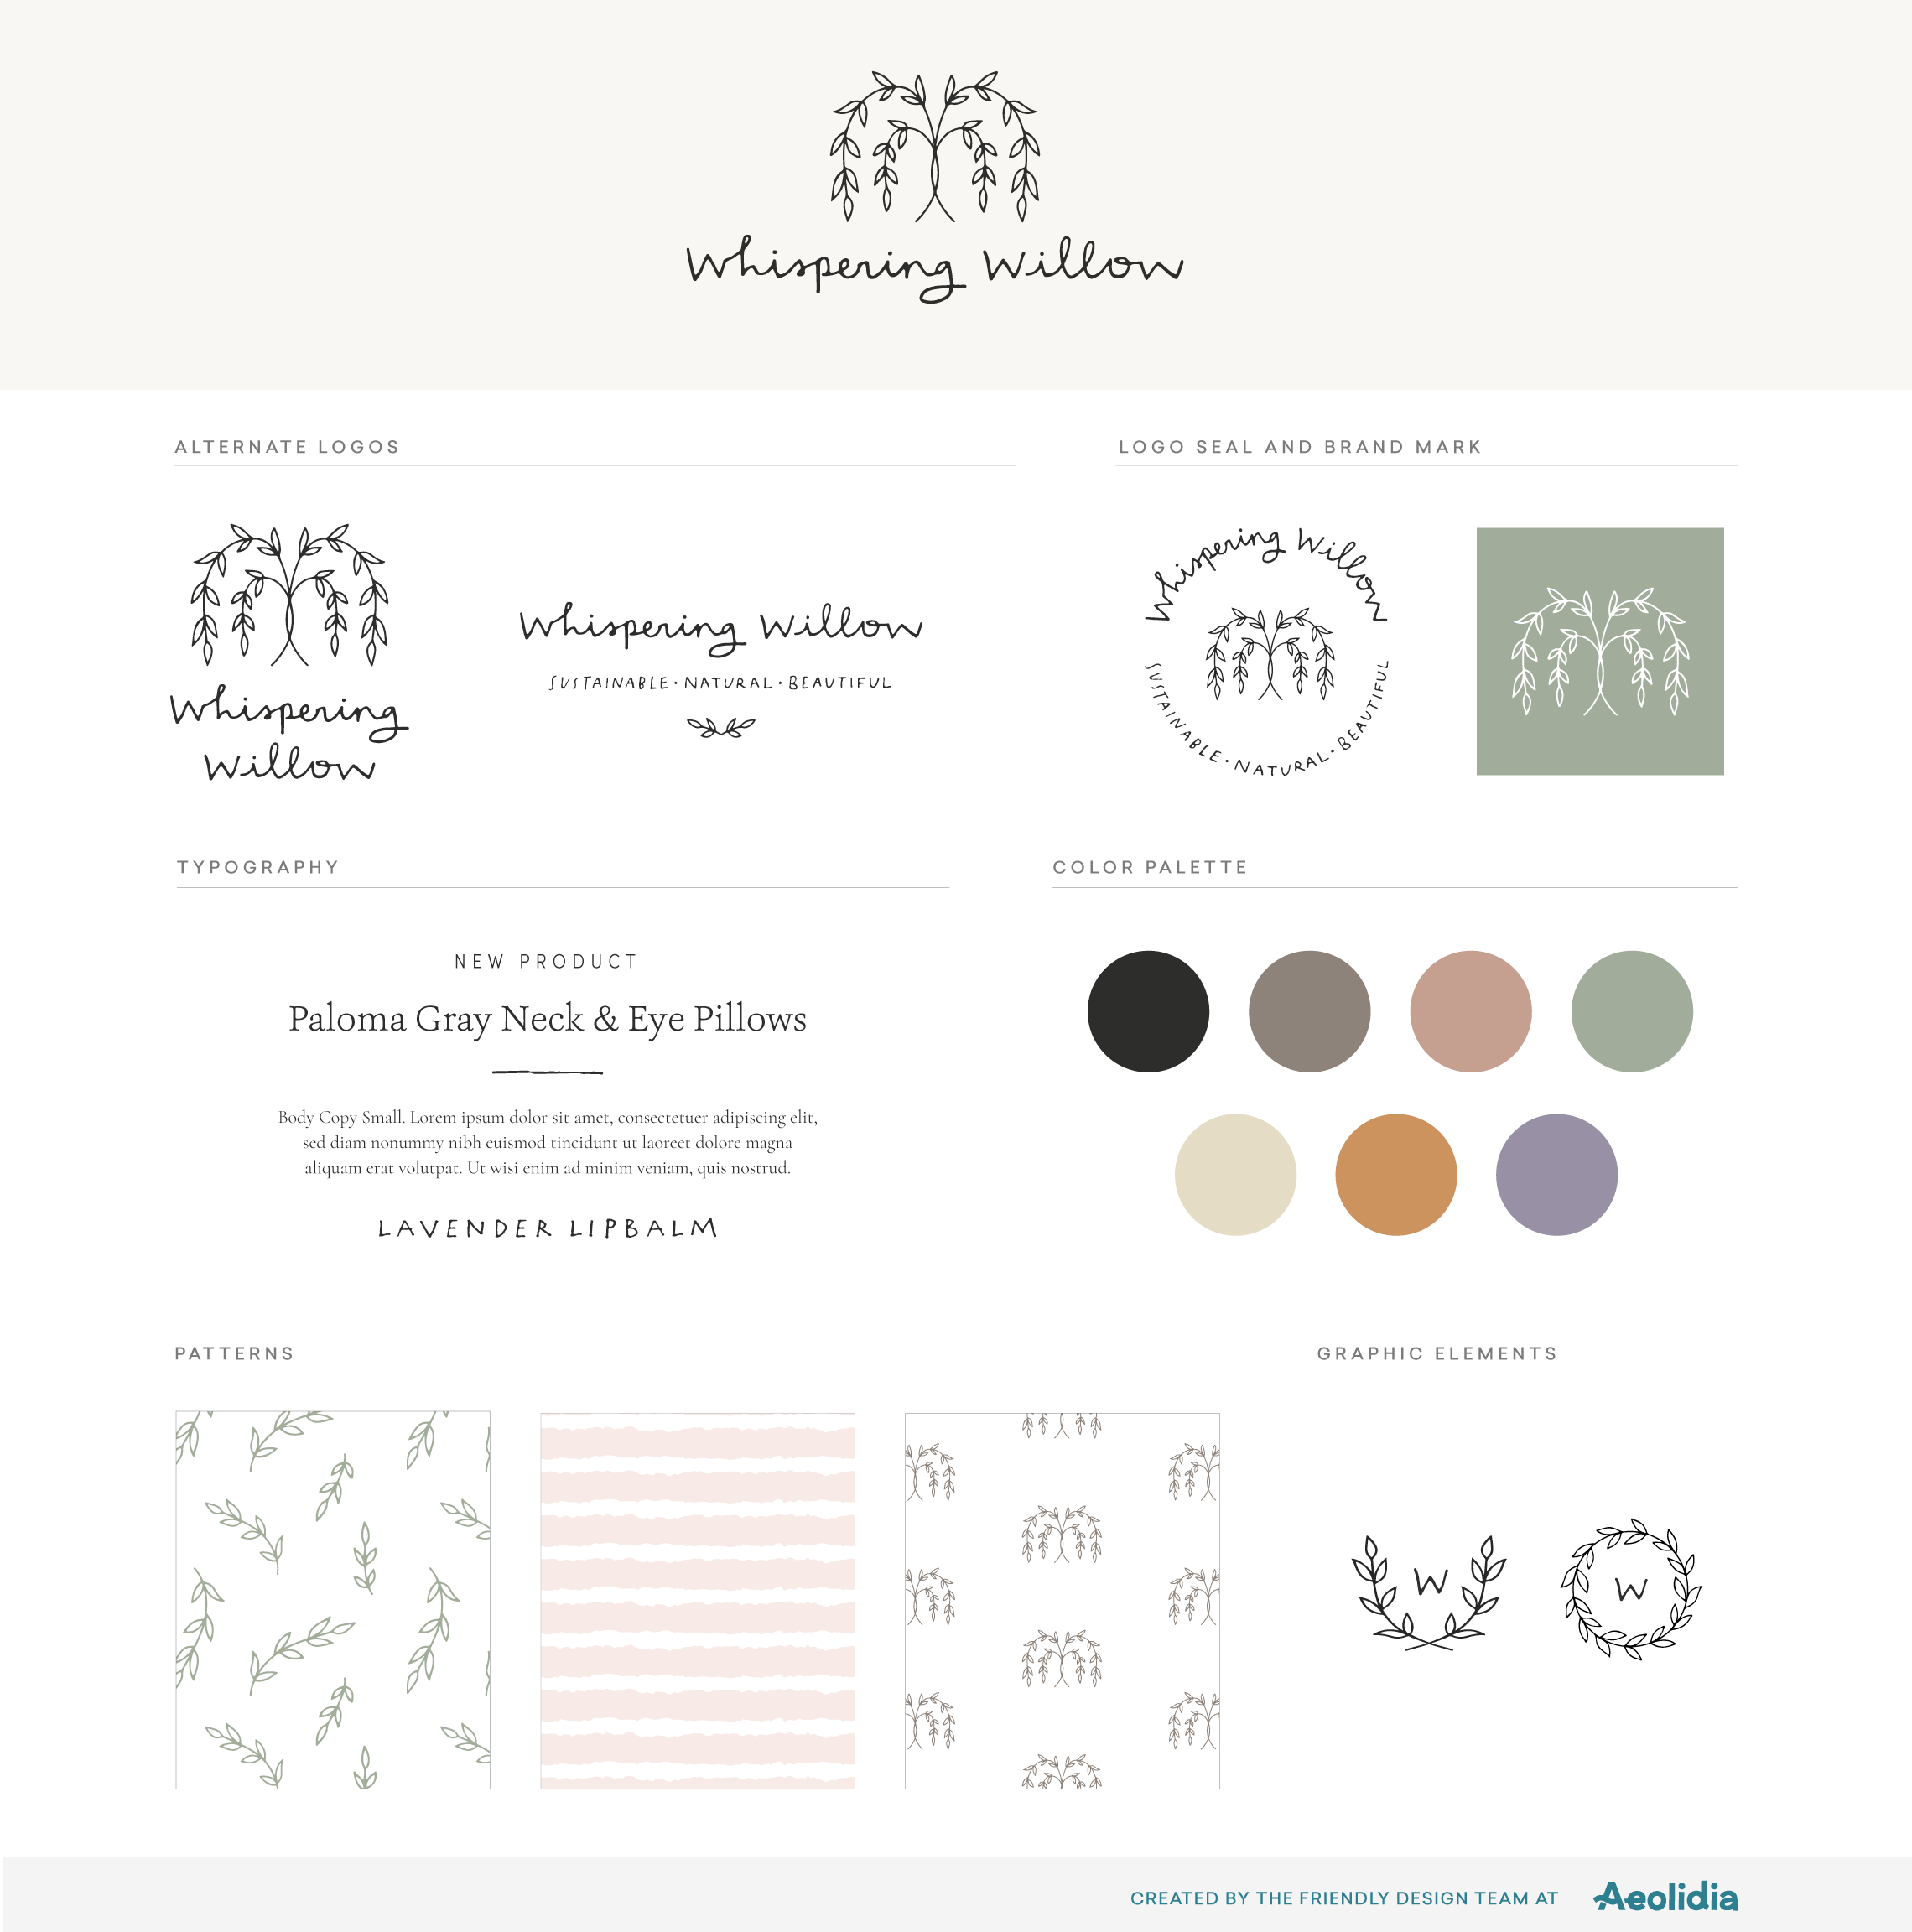 Whispering Willow brand guide - logos, brand mark, typography, colors, patterns, graphic elements.